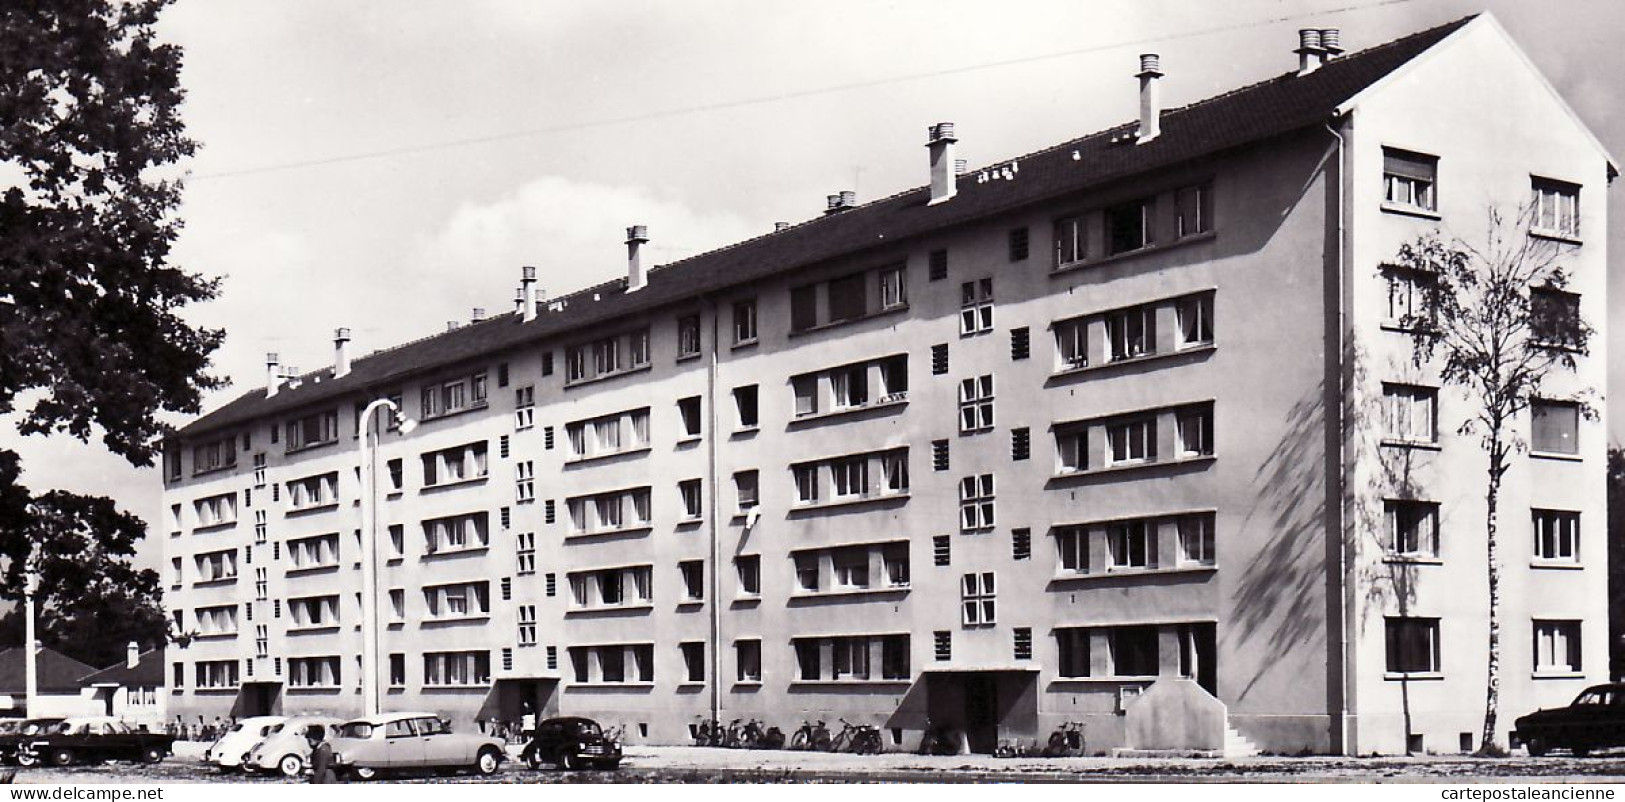 19340 / THOIRY 78-Yvelines Multivues Hotel SAVOIE Commerces Mairie Traction CPSM 1950s MIGNON 6420 Seine-Oise - Thoiry